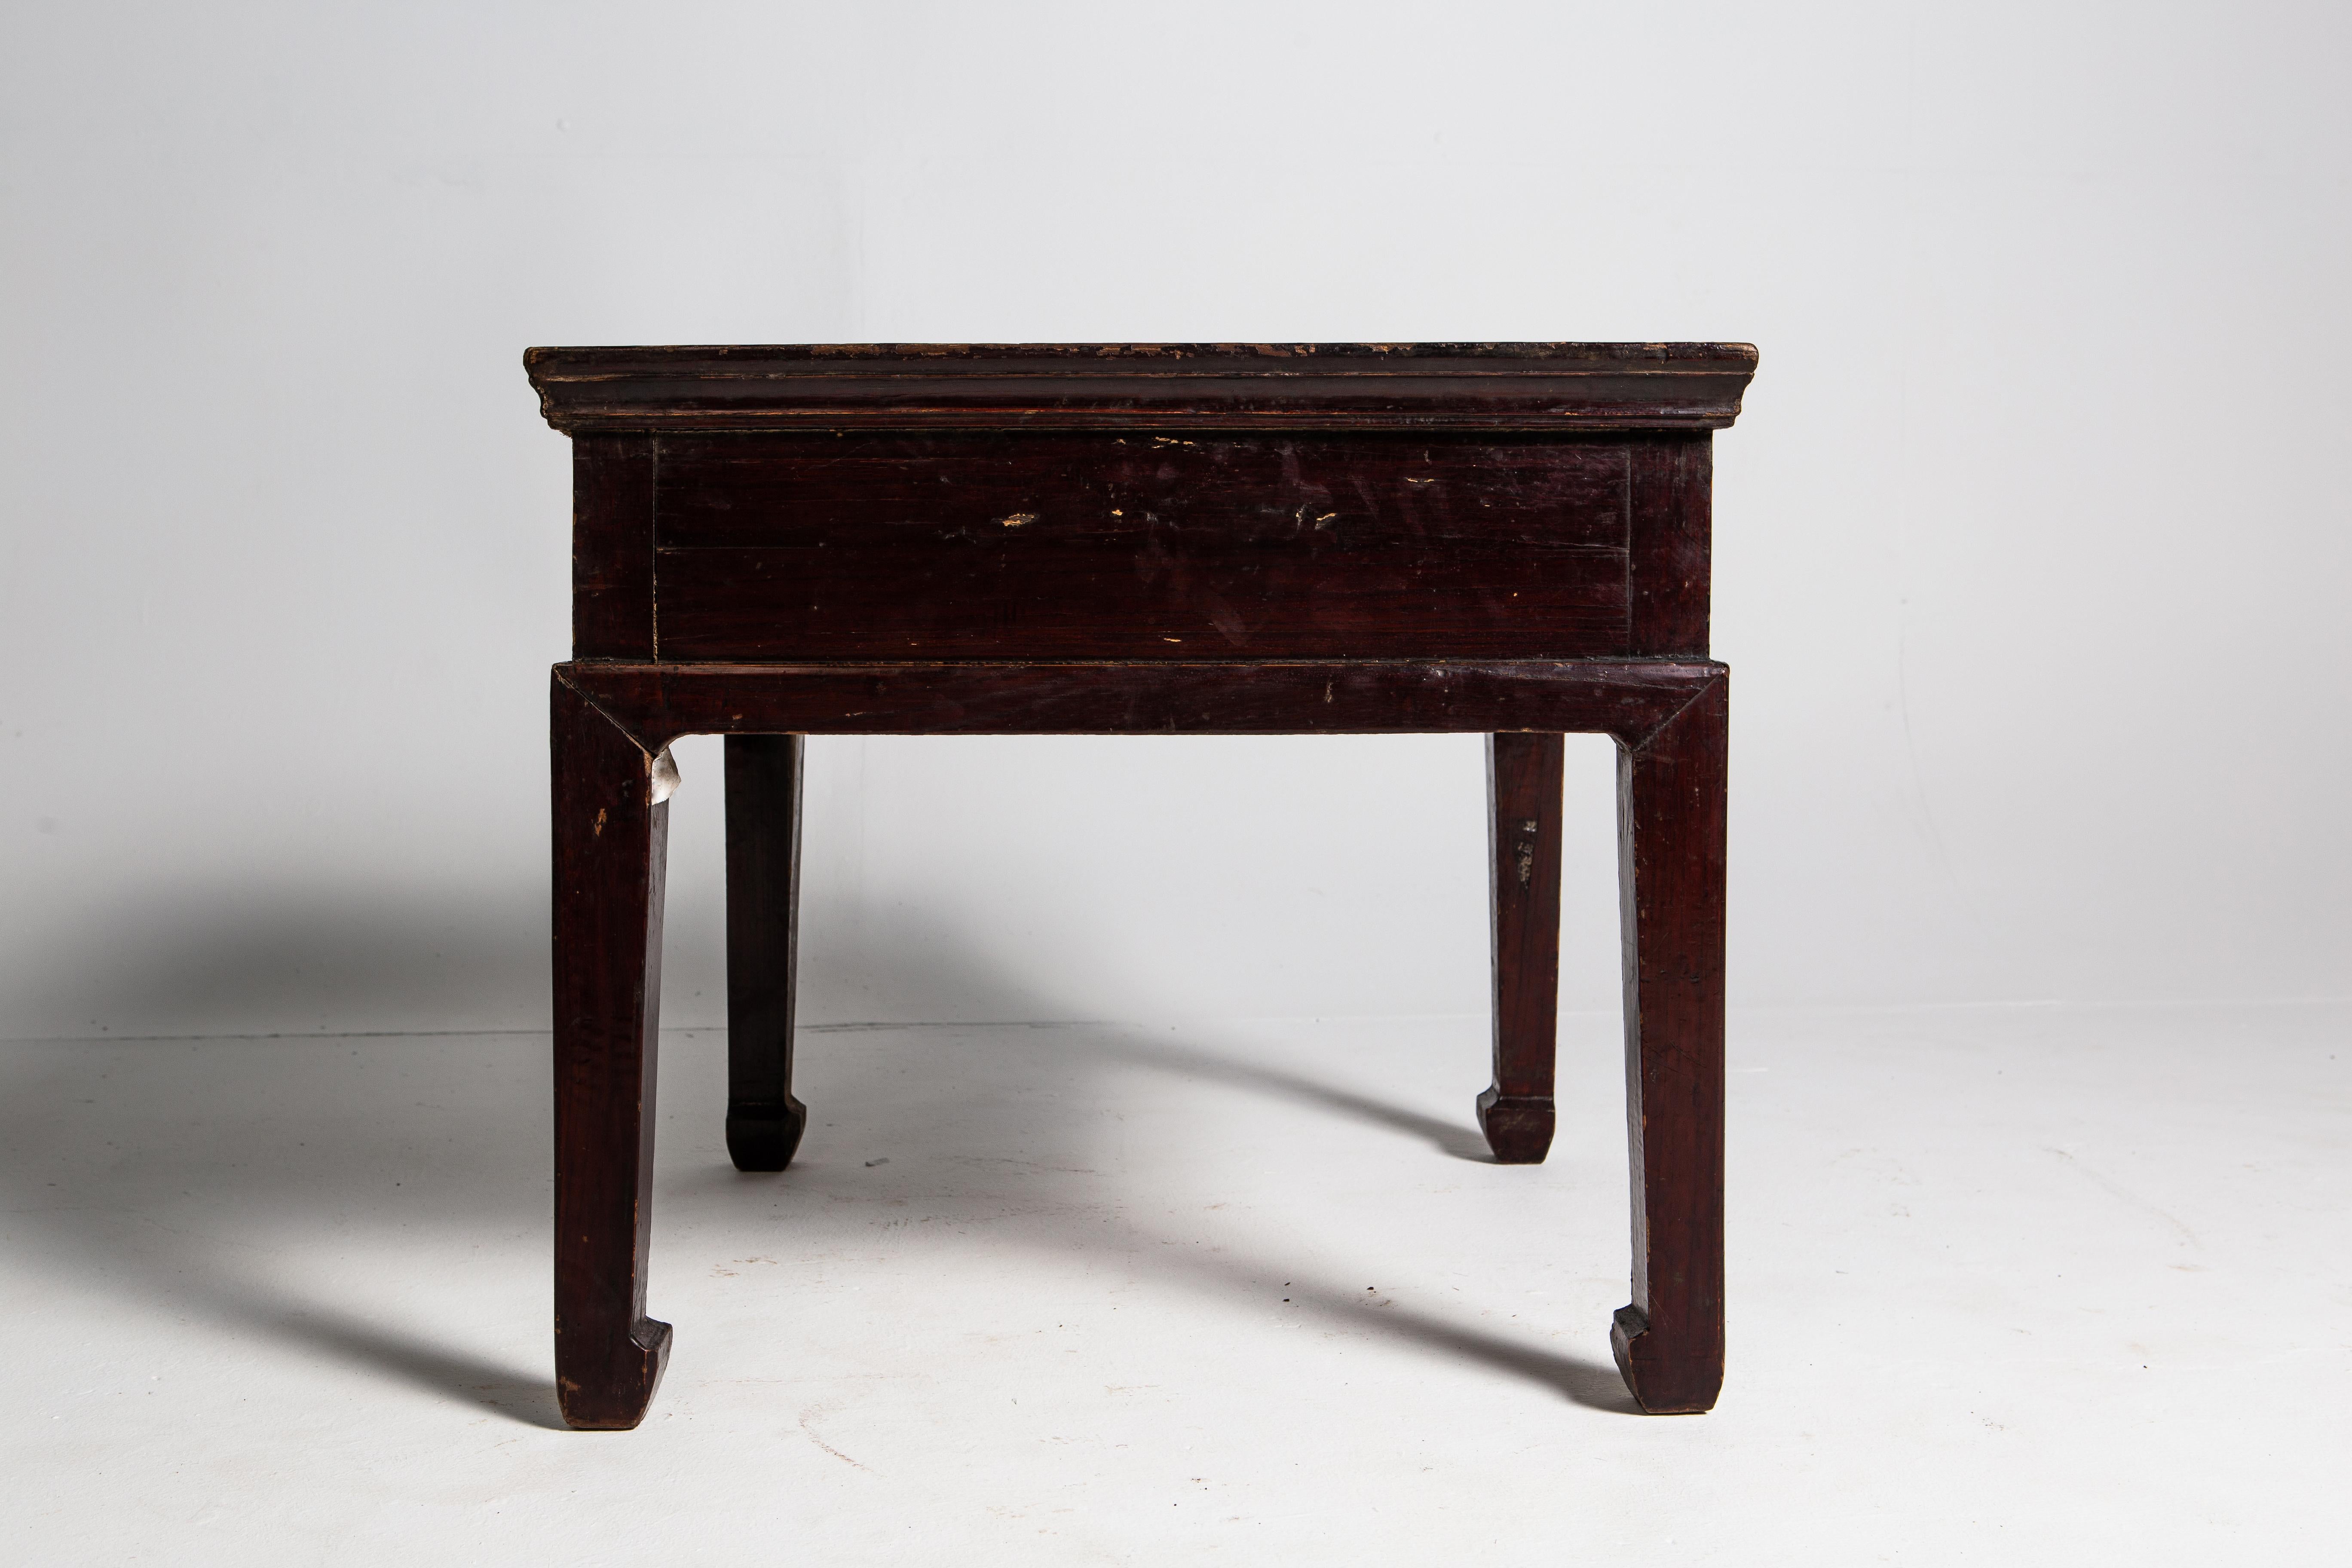 This table dates back to the late-Qing dynasty and is made of elm. The piece features a single drawer with ring-pull handle and rests on traditional hoof feet. Overall, the piece has a lovely patina, although there is wear consistent with its age